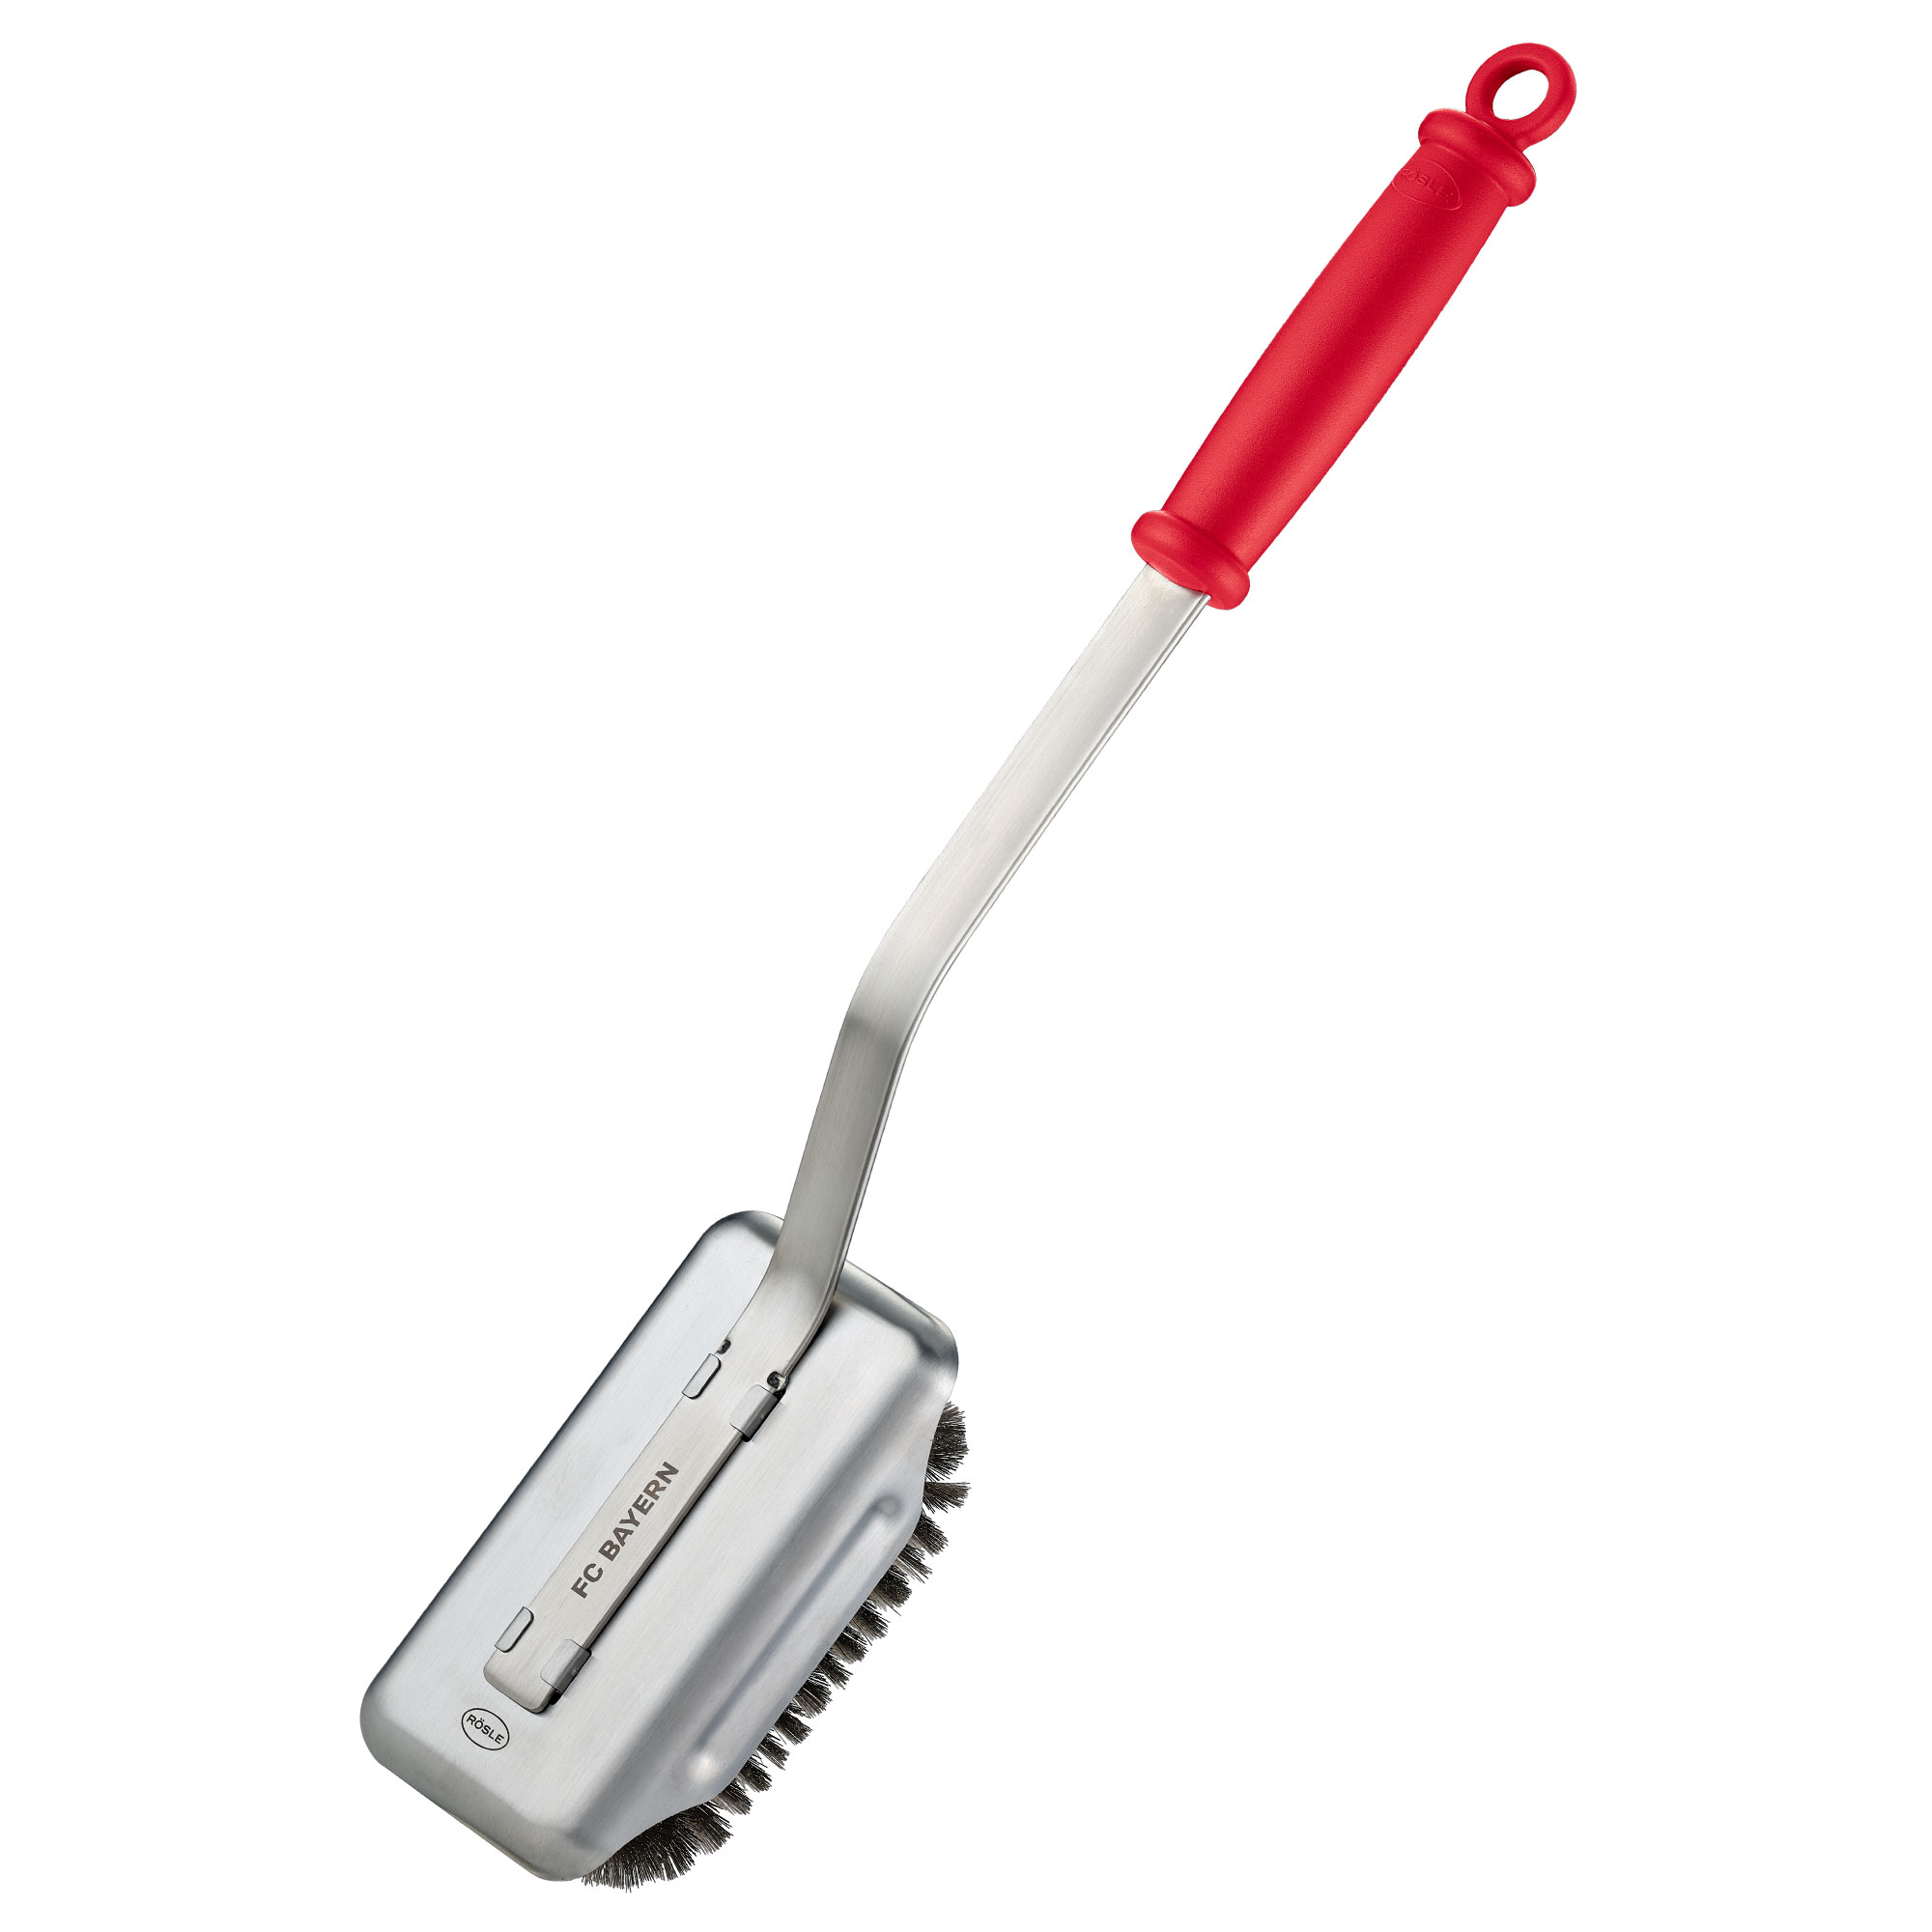 FC Bayern Edition - Barbecue Cleaning Brush SlideX